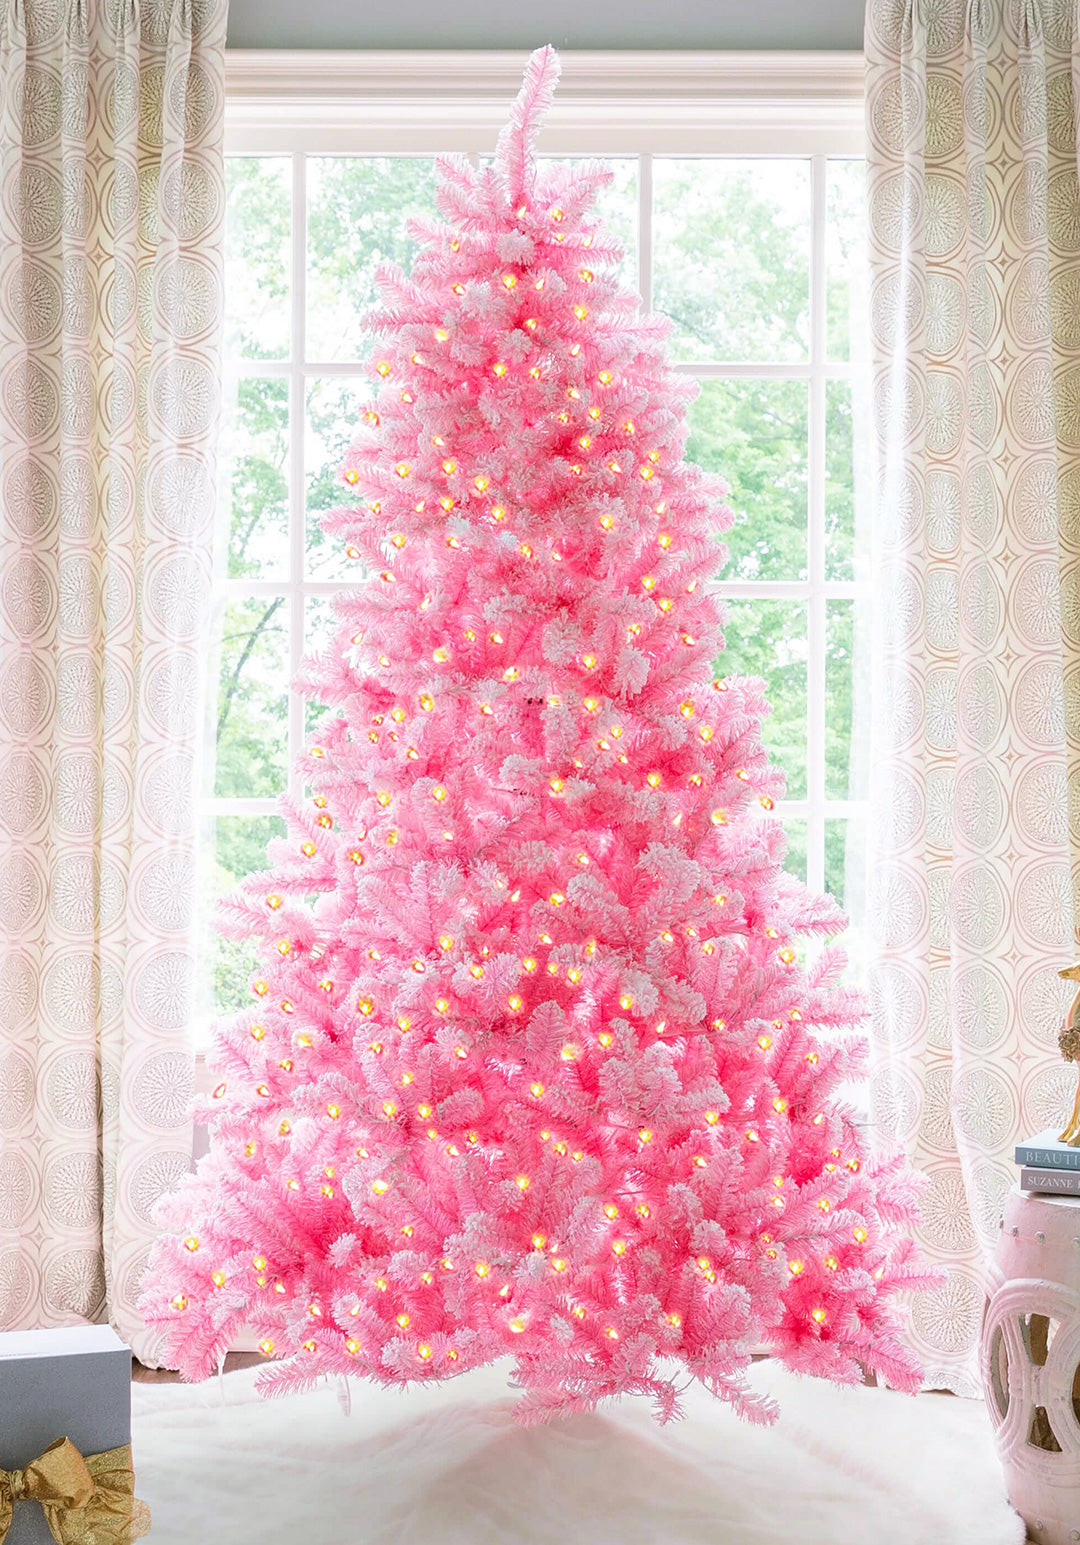 King of Christmas 7.5' Duchess Pink Flock Artificial Christmas Tree with 600 Warm White LED Lights